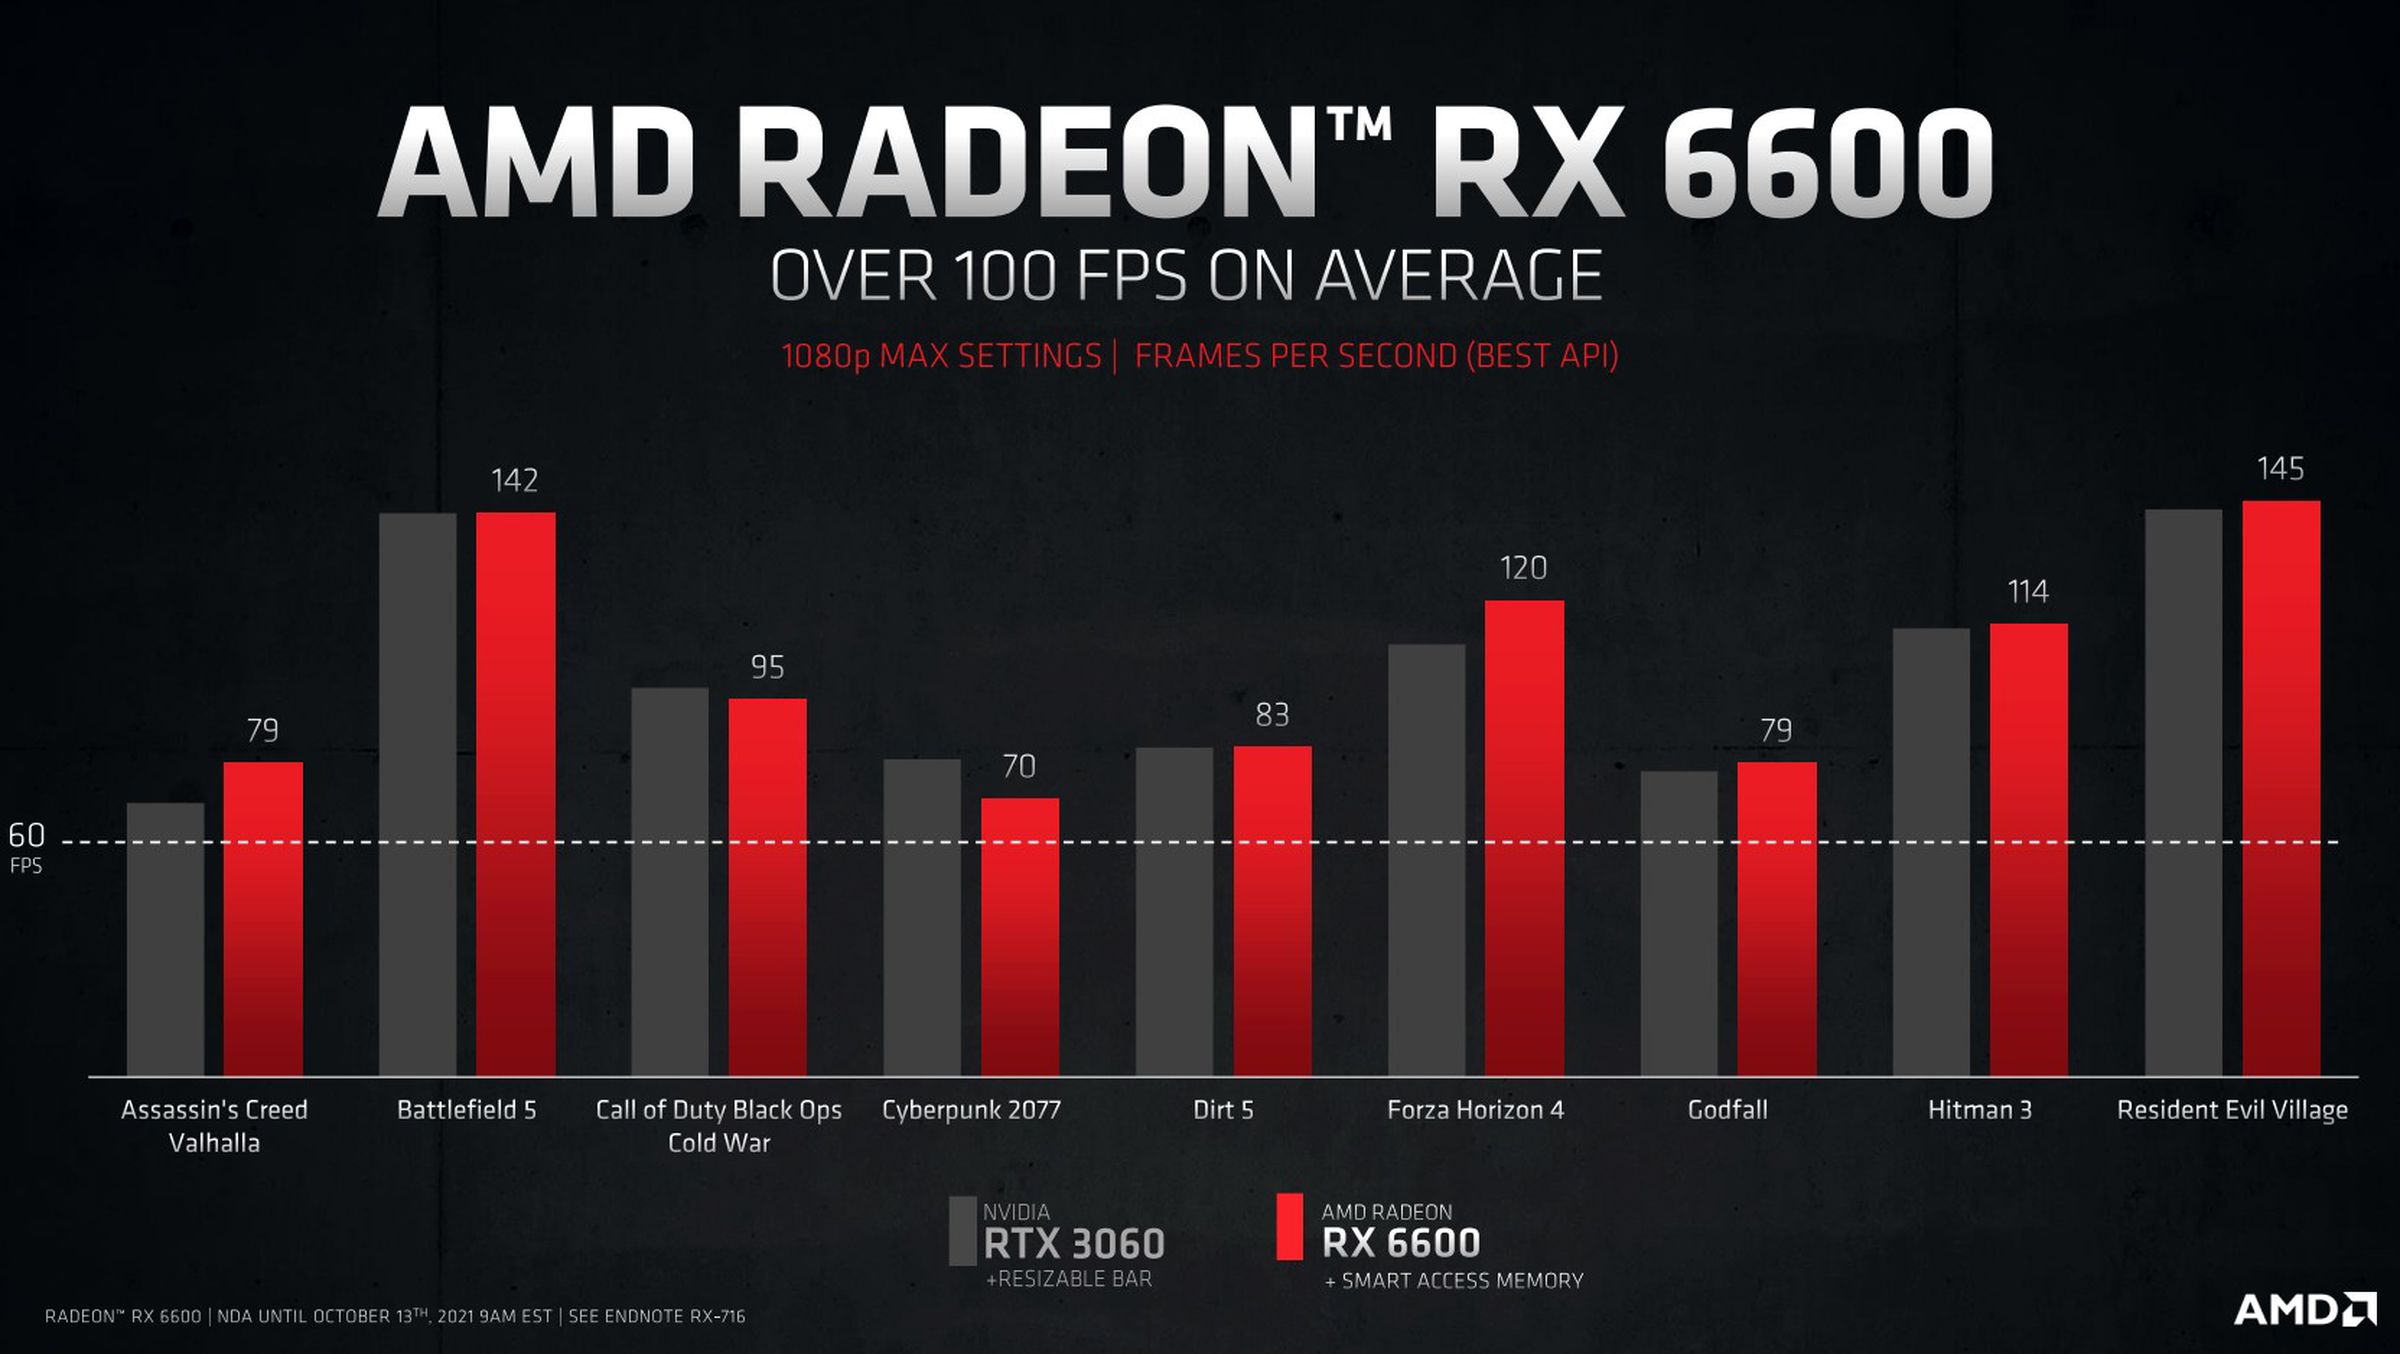 AMD says its card wins some and loses some compared to the identically priced* Nvidia RTX 3060.